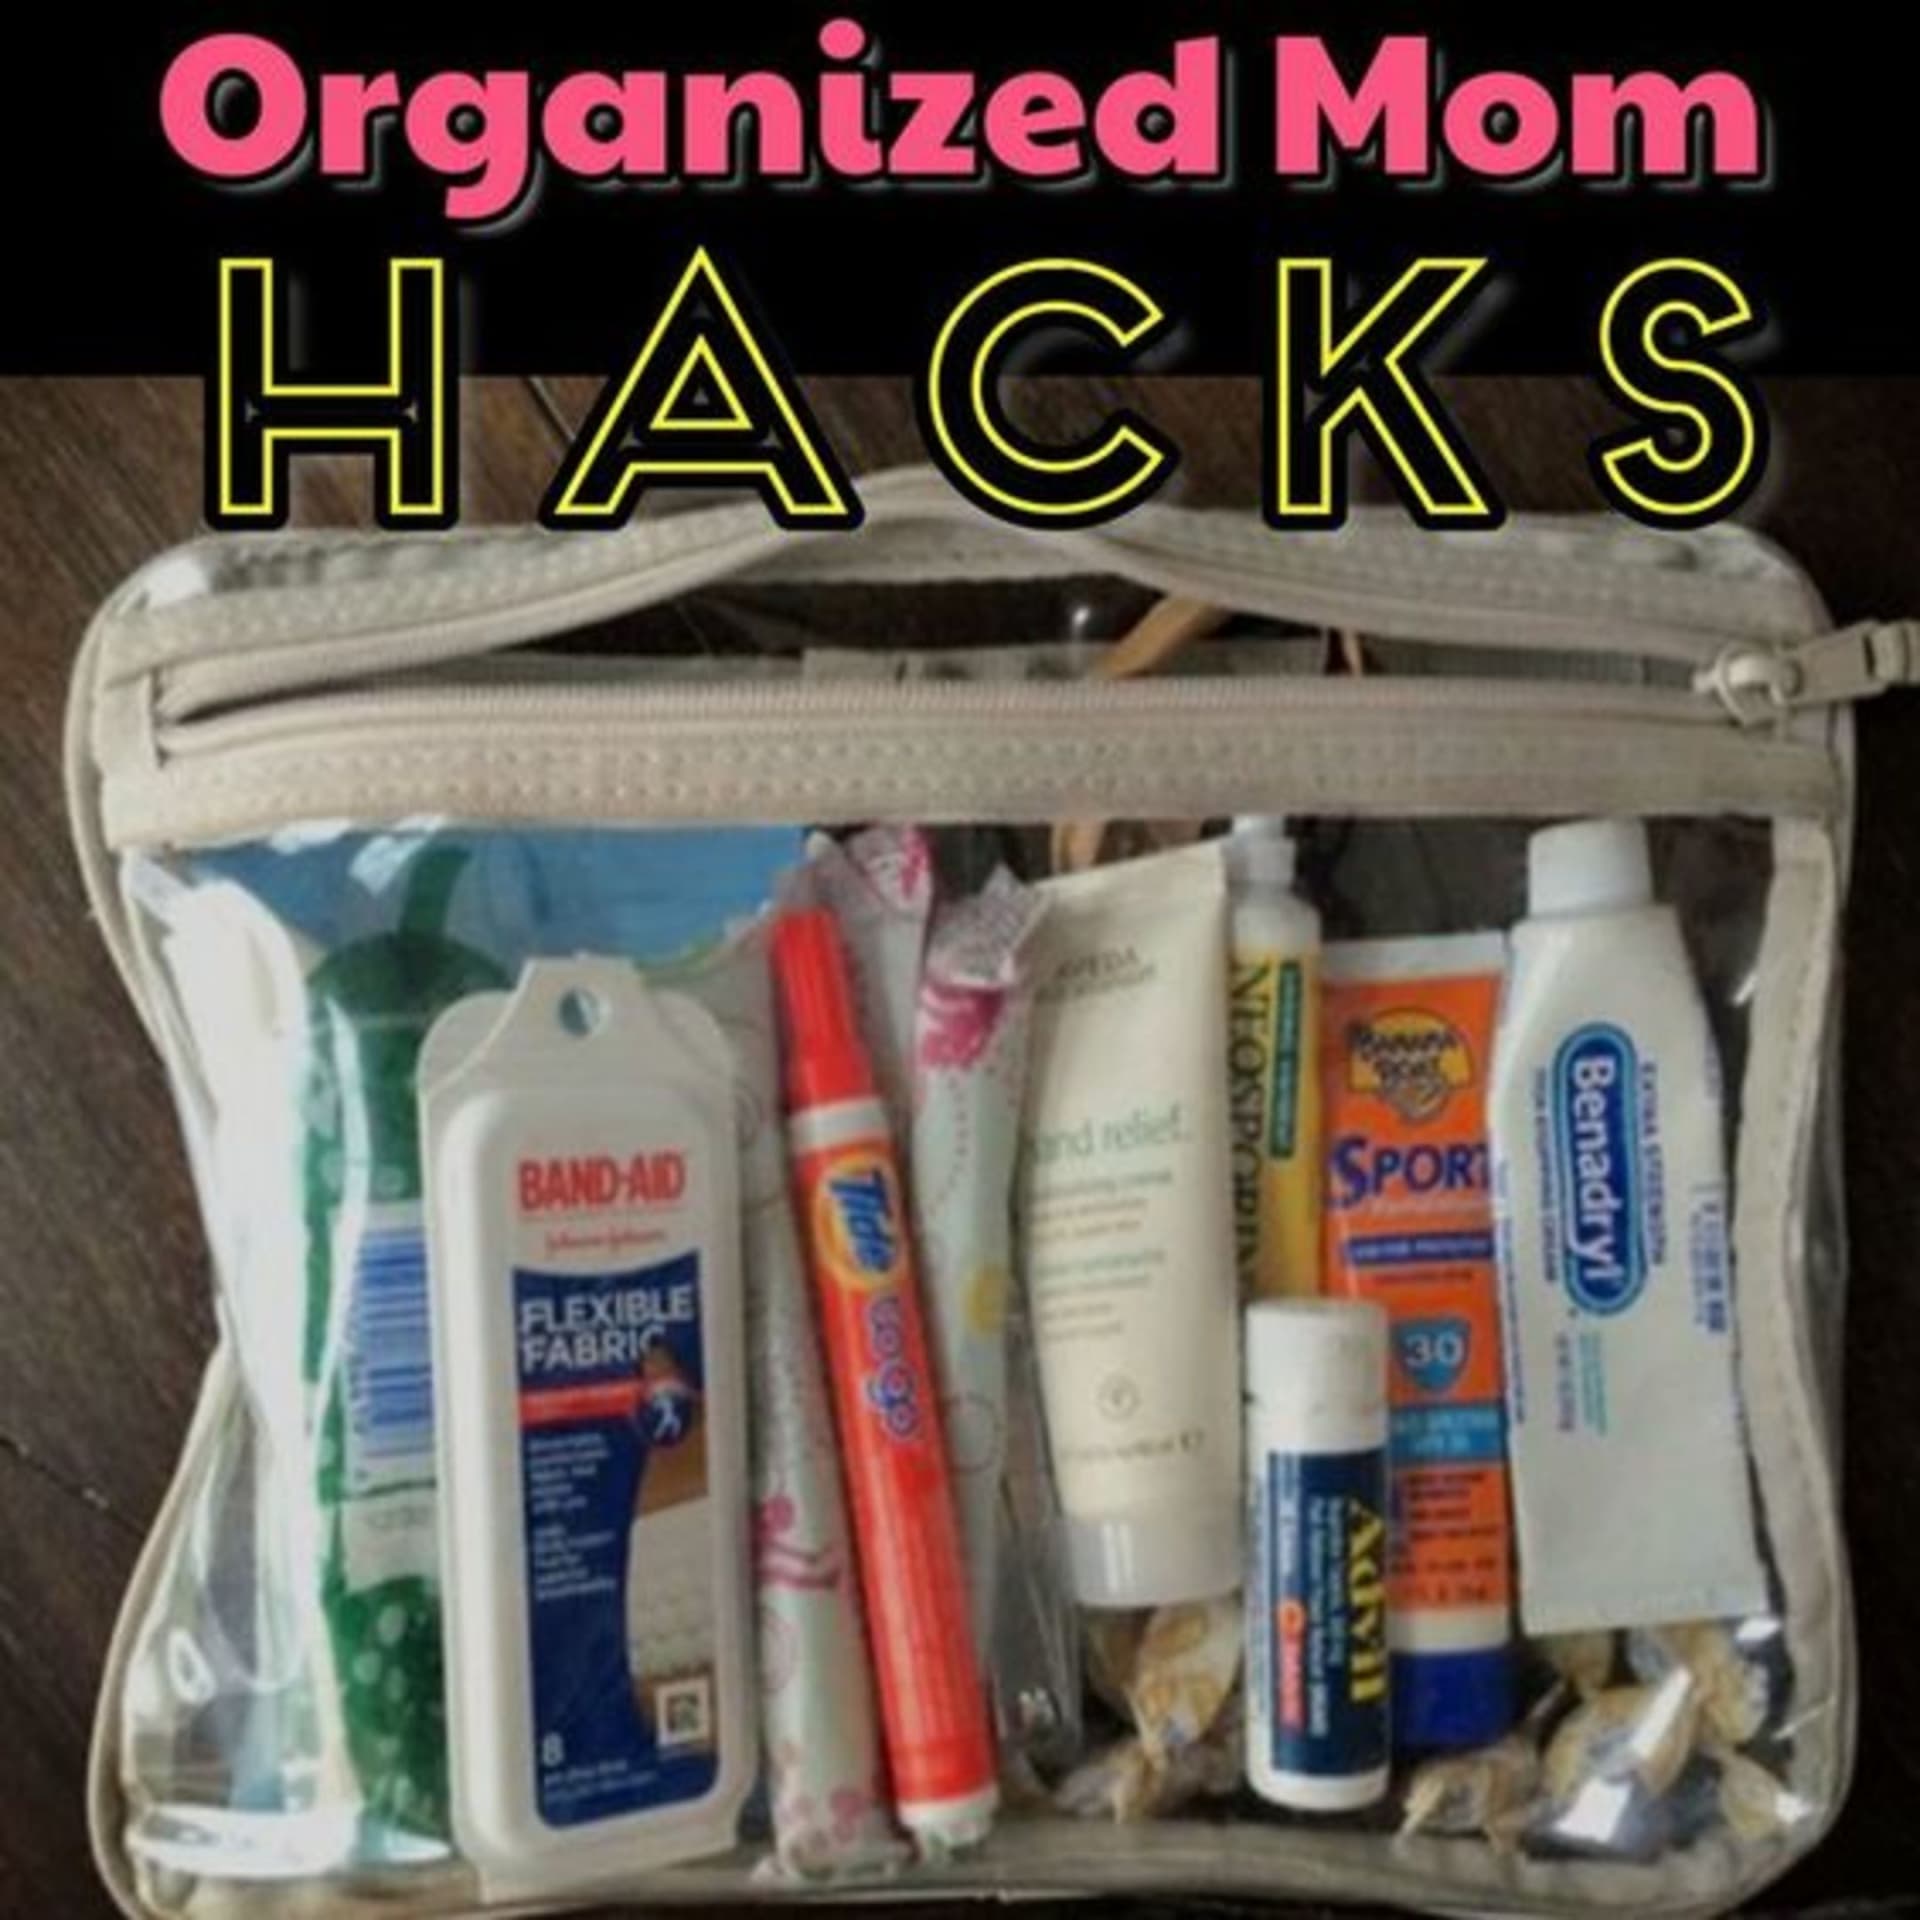 Organized Mom Hacks!  Declutter and organize even if feeling overhwelmed - you CAN be an organized mom!